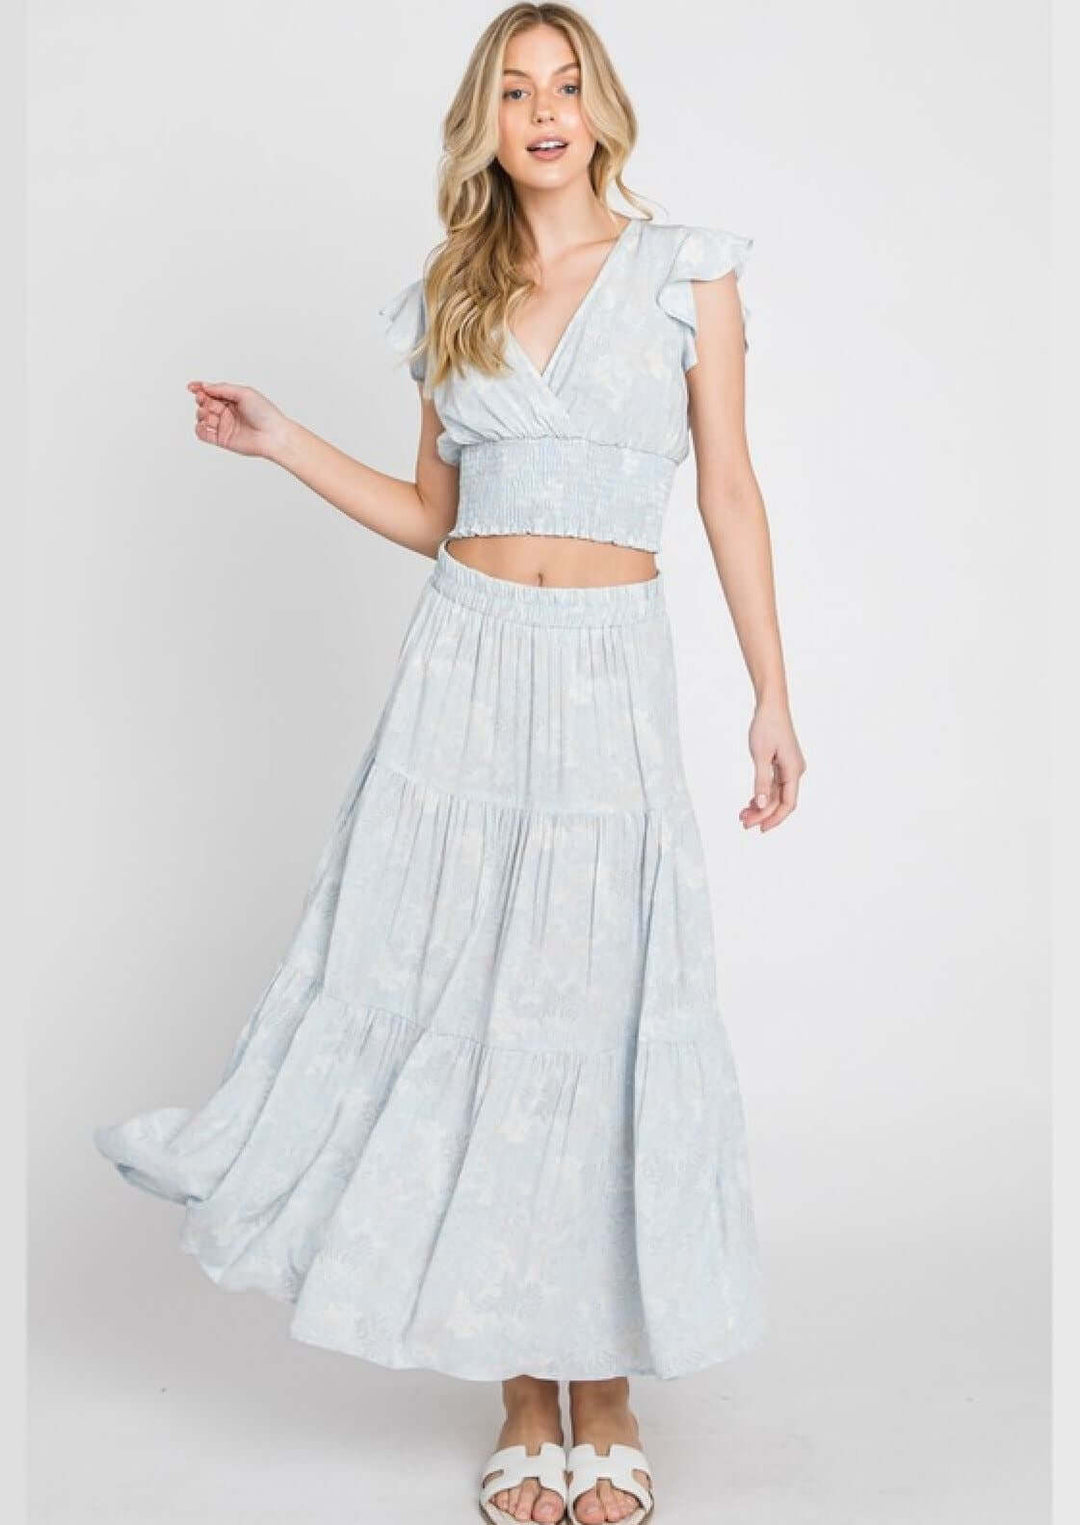 Ladies USA Made Woven A-Line Floral 3 Tiered Maxi Skirt - Subtle Floral Print Light Blue, Light Grey & White | Brand: Final Touch Style# NS80079B 